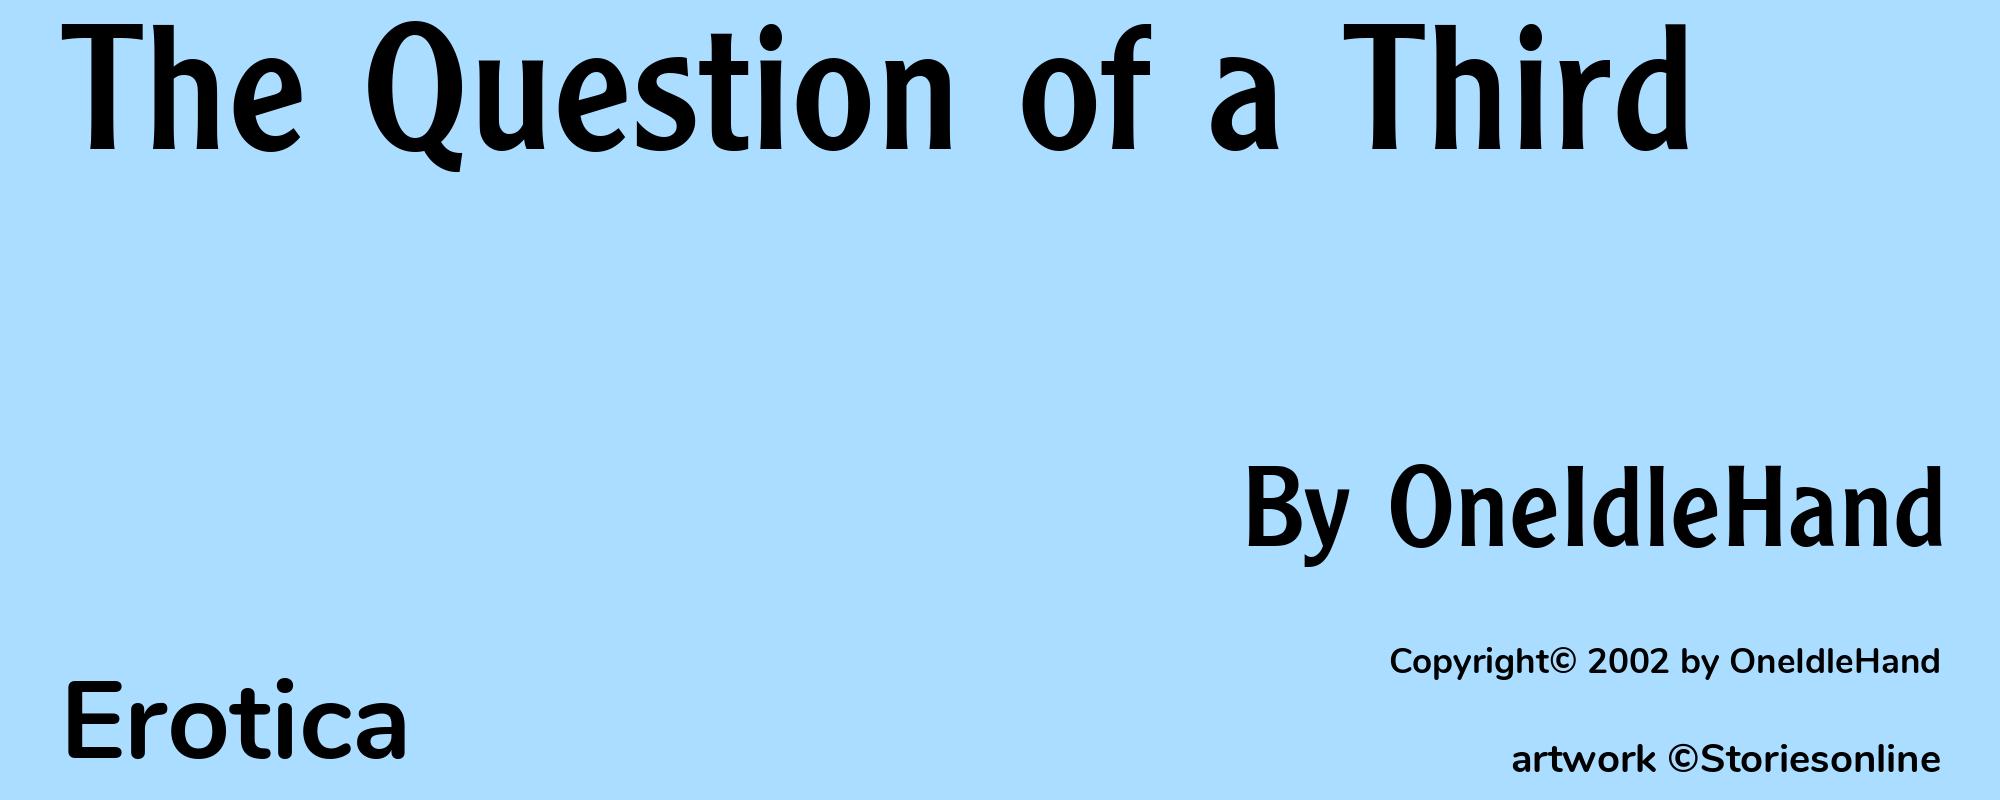 The Question of a Third - Cover